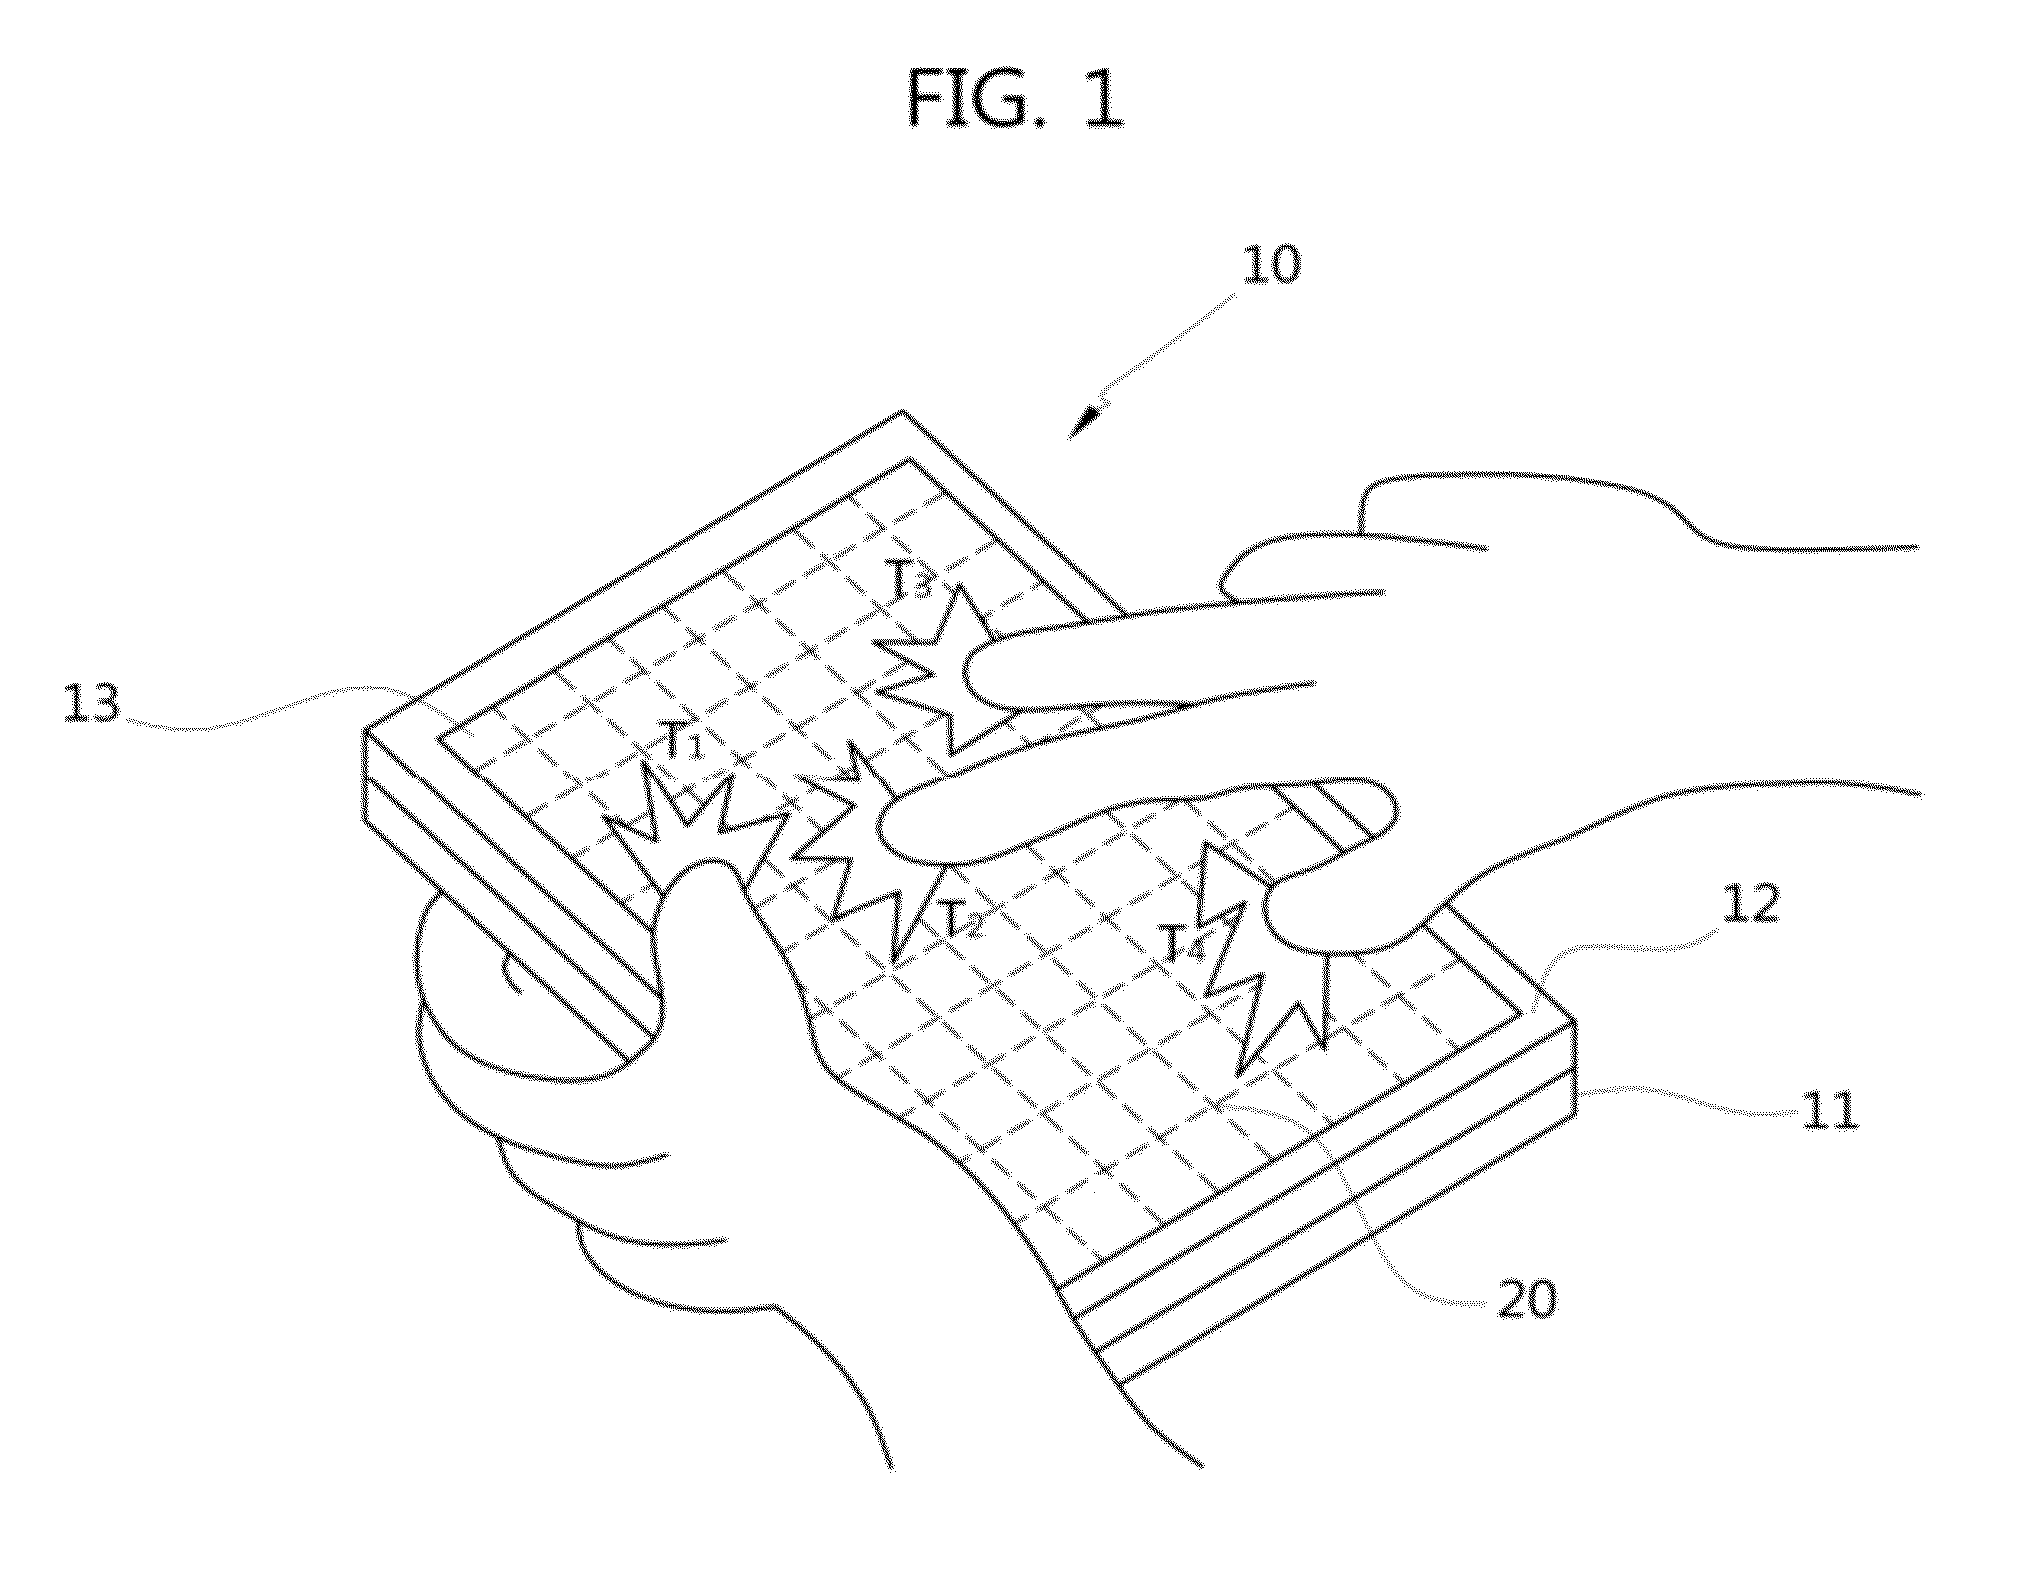 Method for providing a user interface based on touch pressure, and electronic device using same